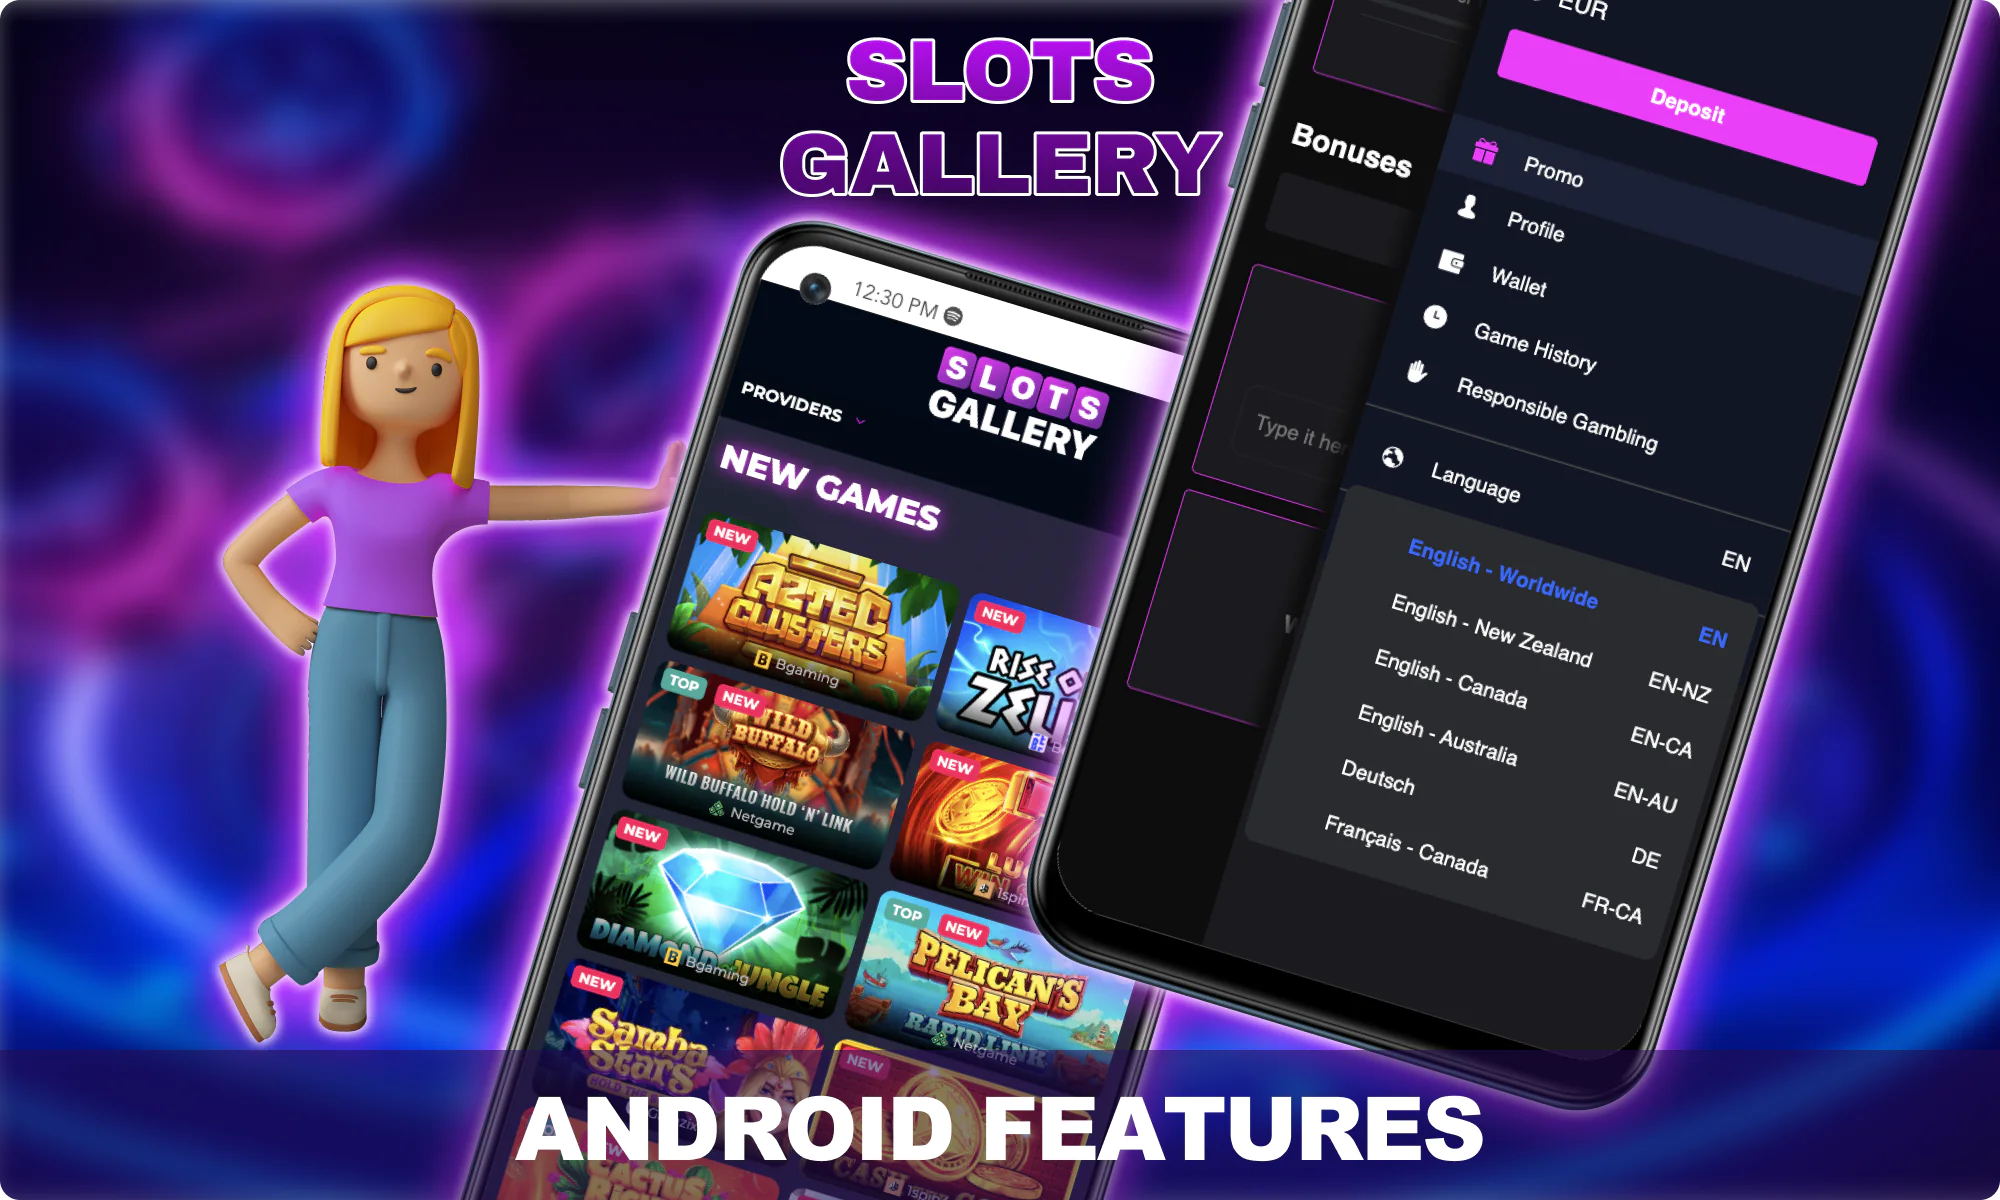 Key features of Slots Gallery Android App